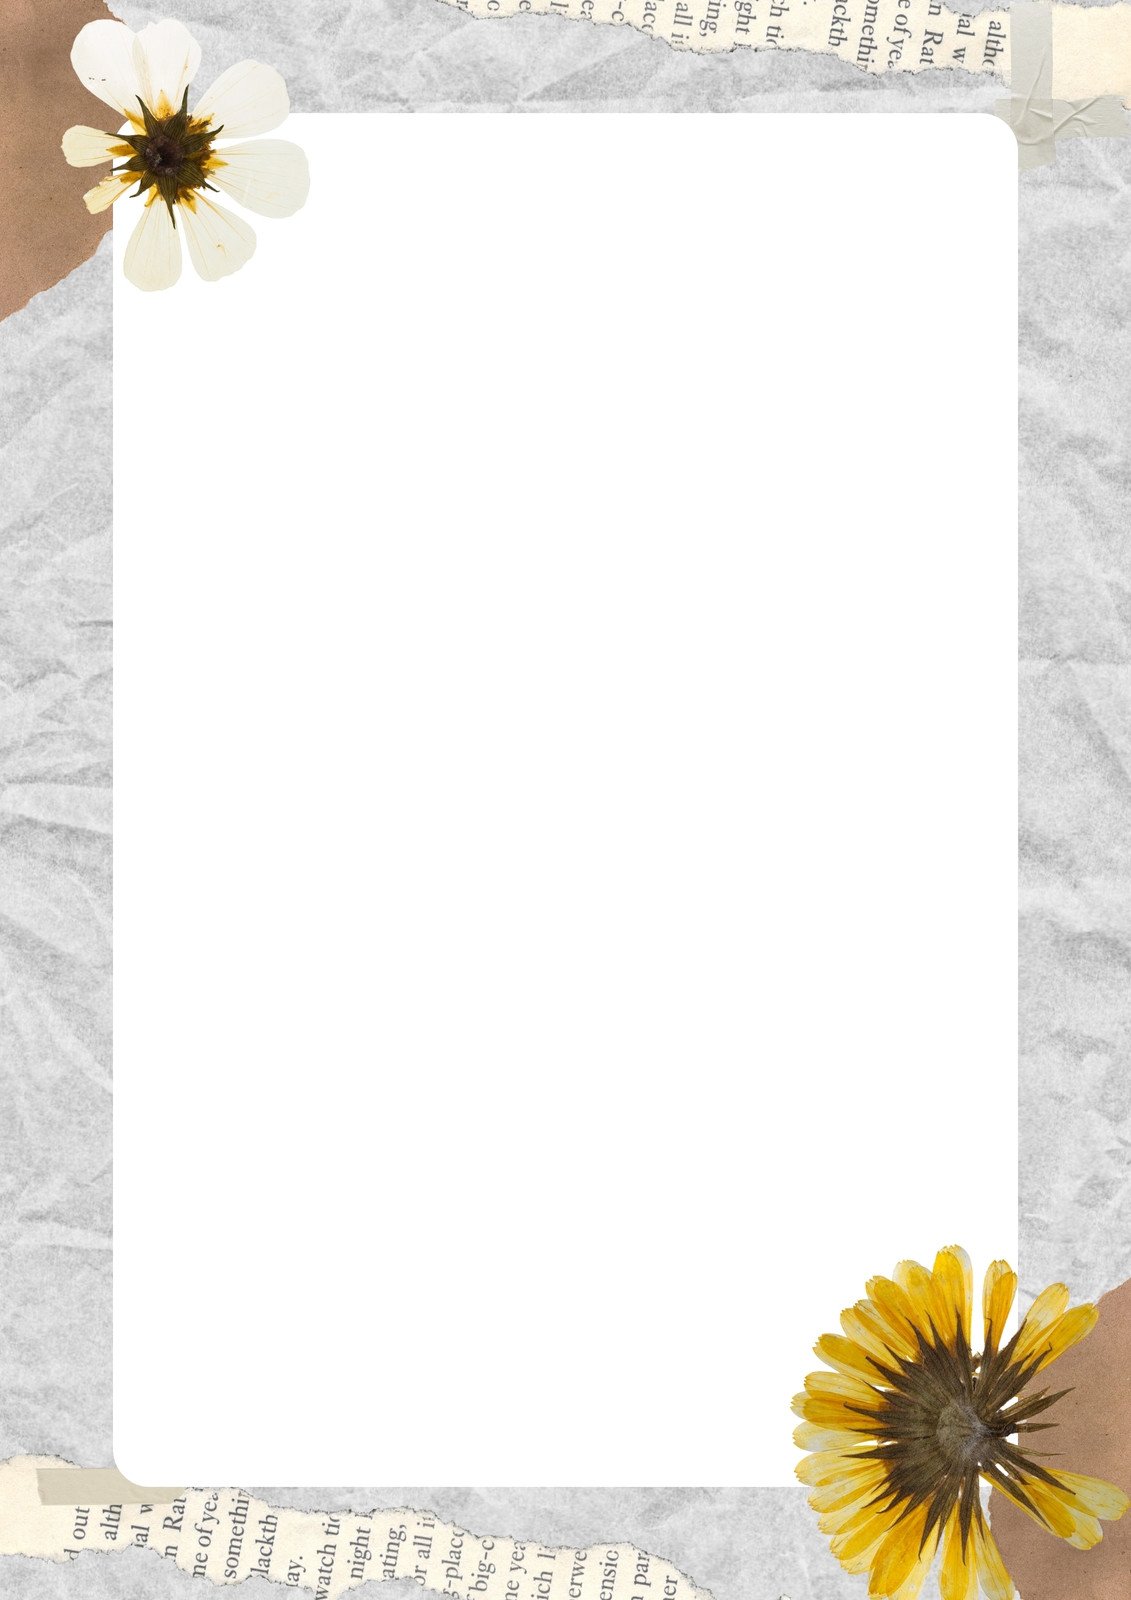 Page 10 - Free printable page border templates you can customize | Canva